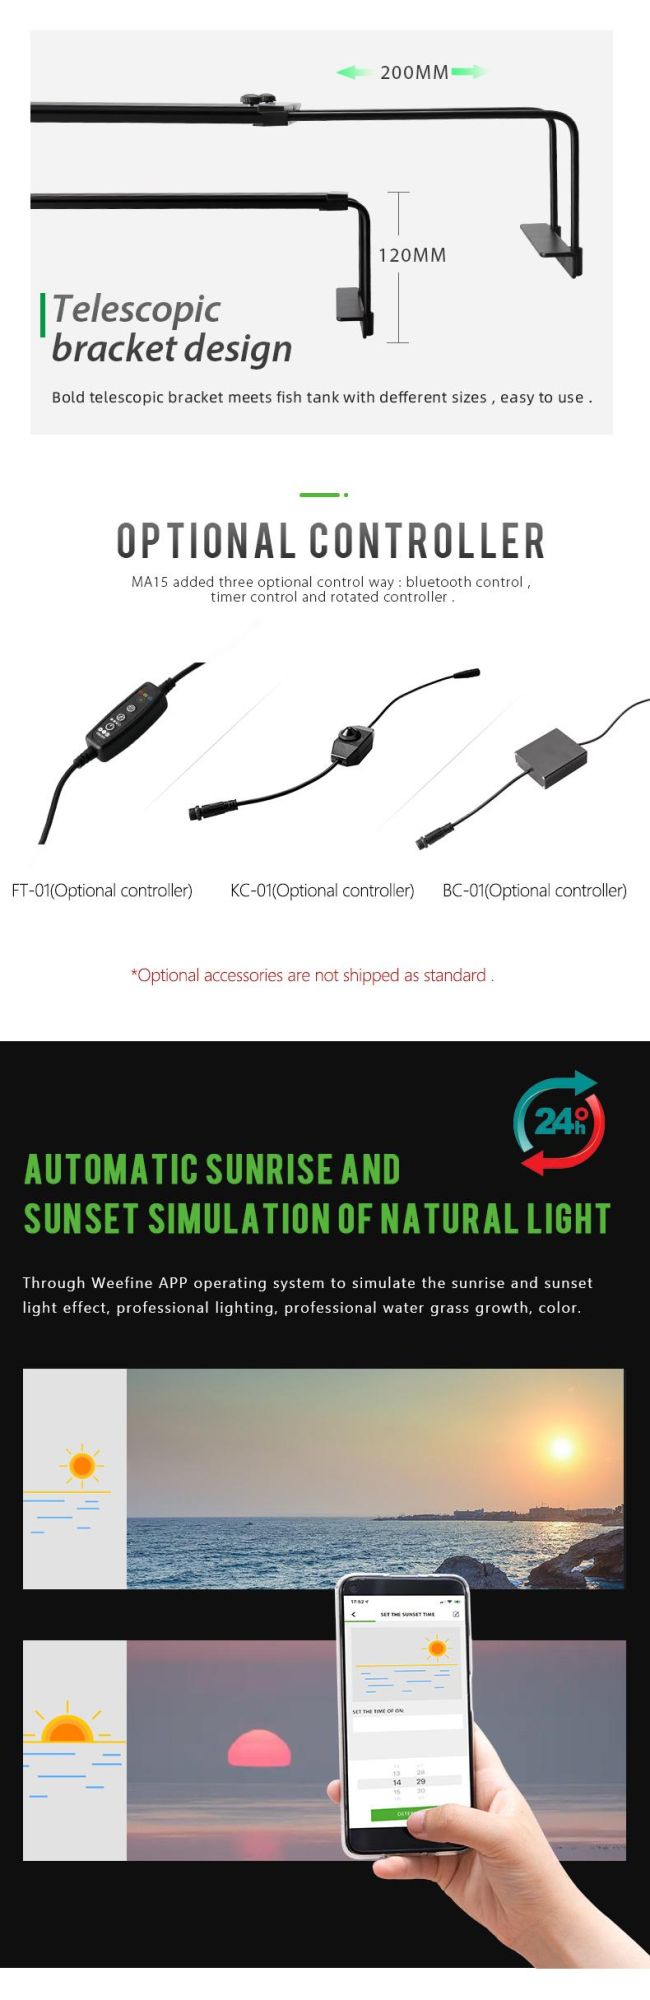 42W Programmable LED Aquarium Light for Coral Reef with Sunset and Sunrise Mode (MA15)